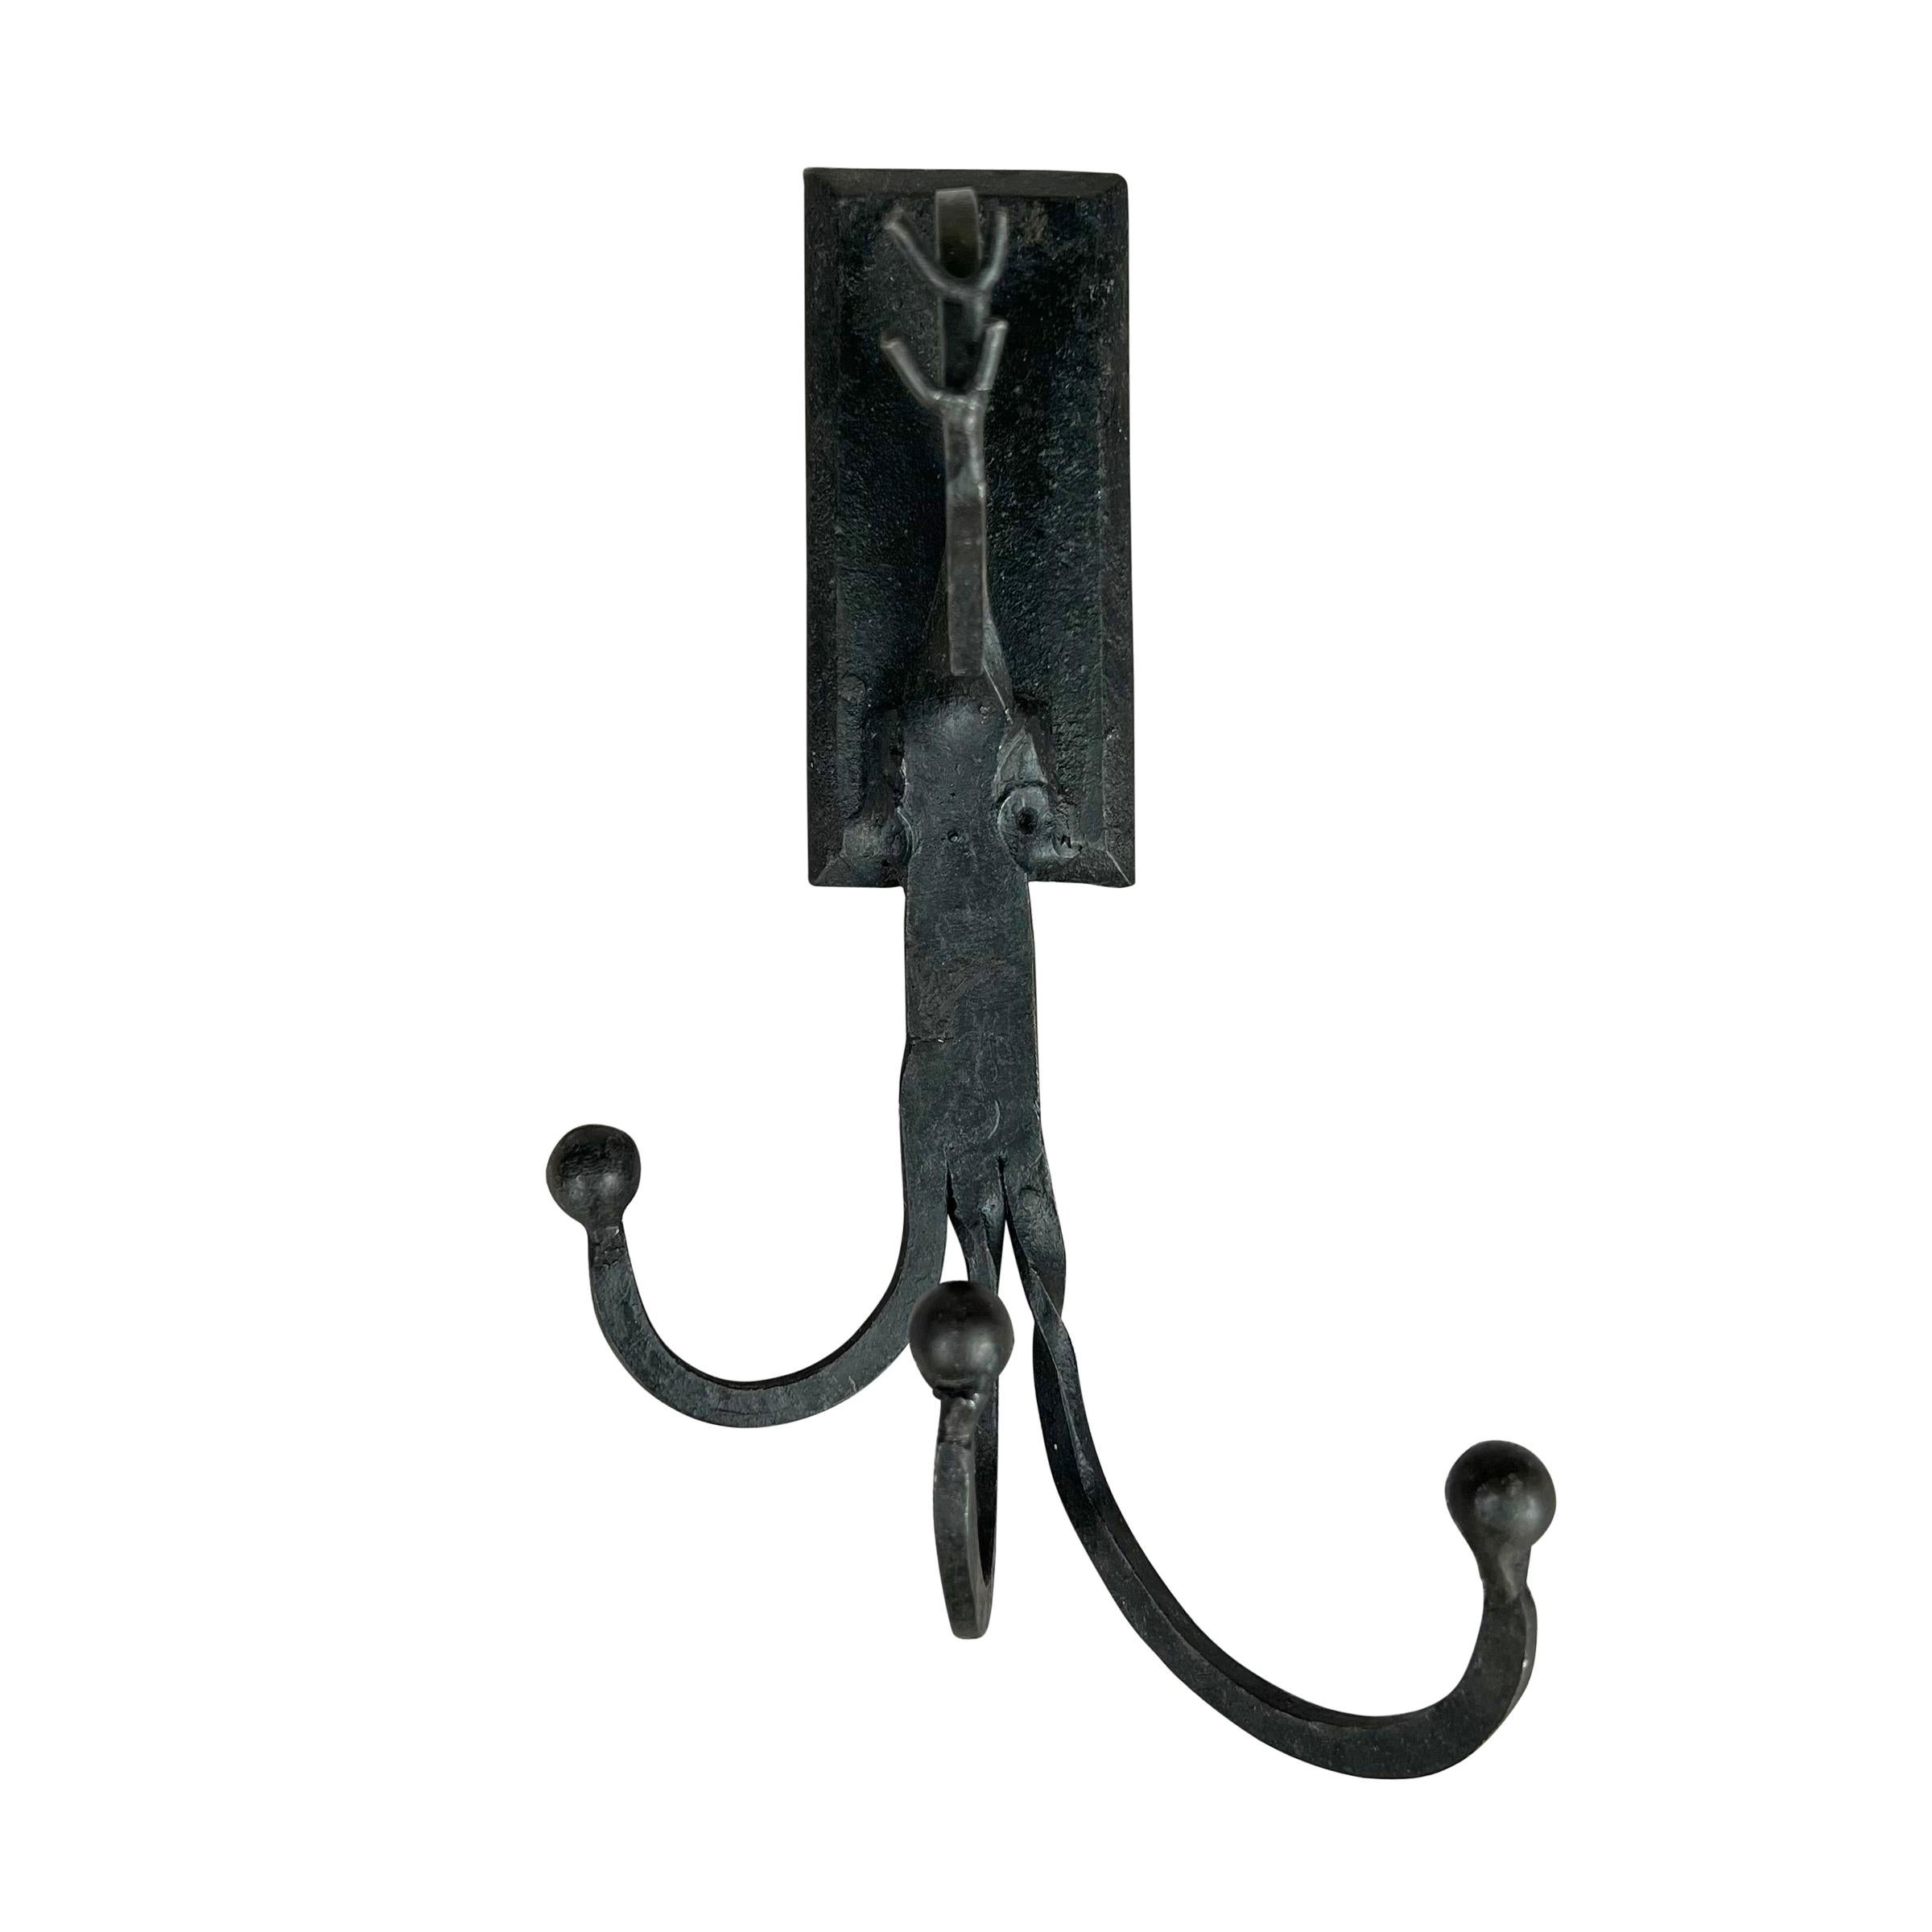 Rustic Vintage Handwrought Iron Horse Wall Hook